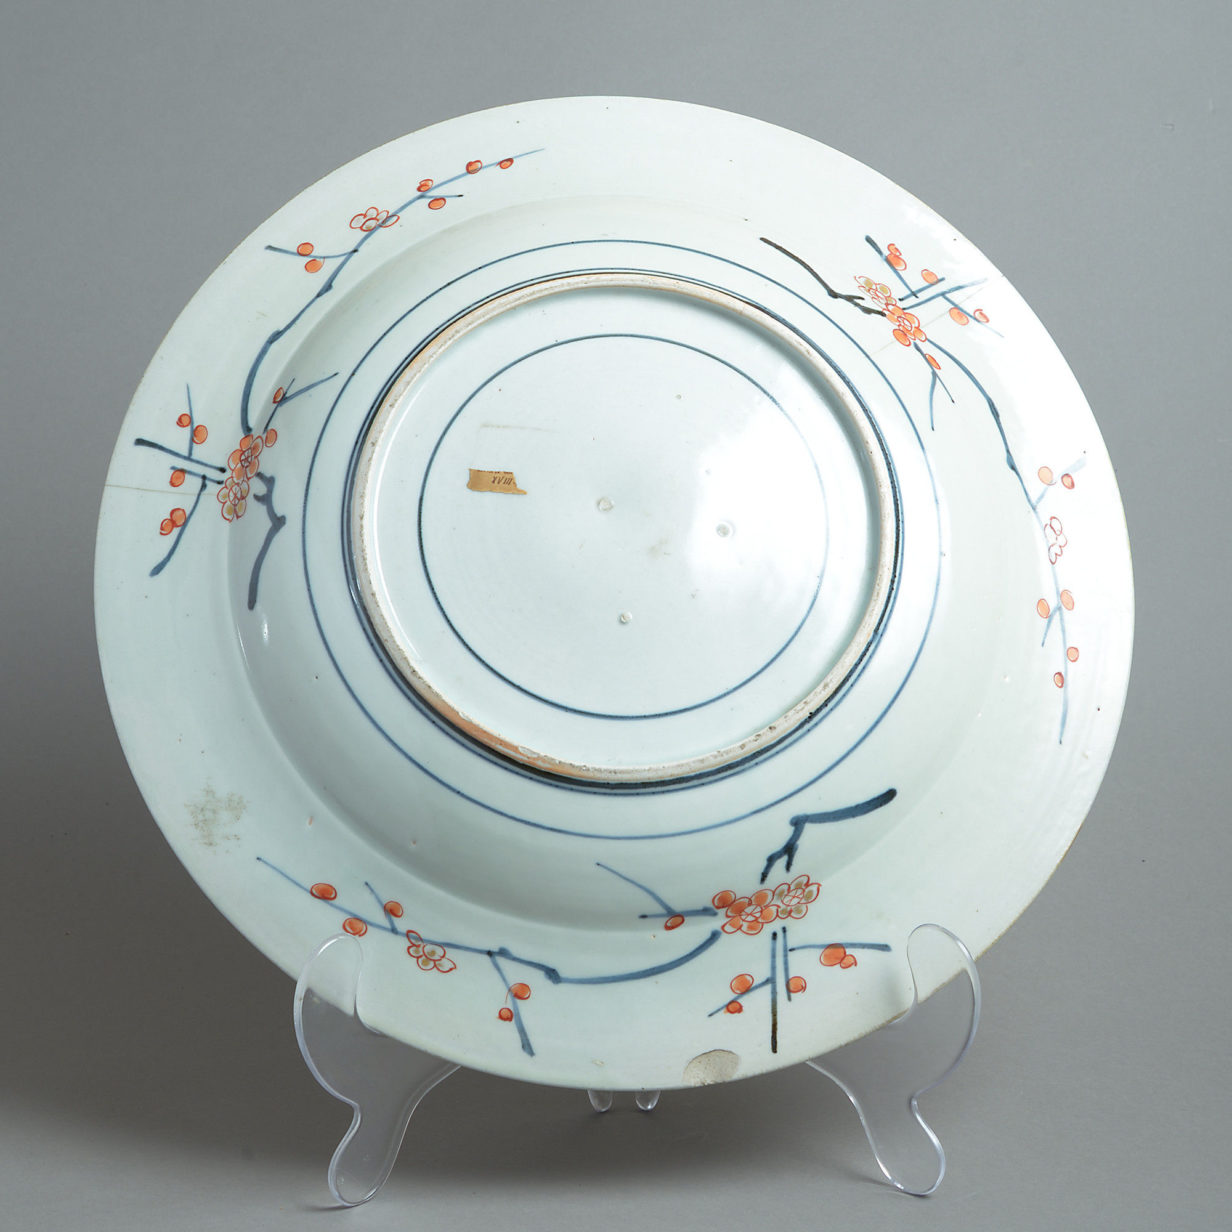 Early 18th century imari charger